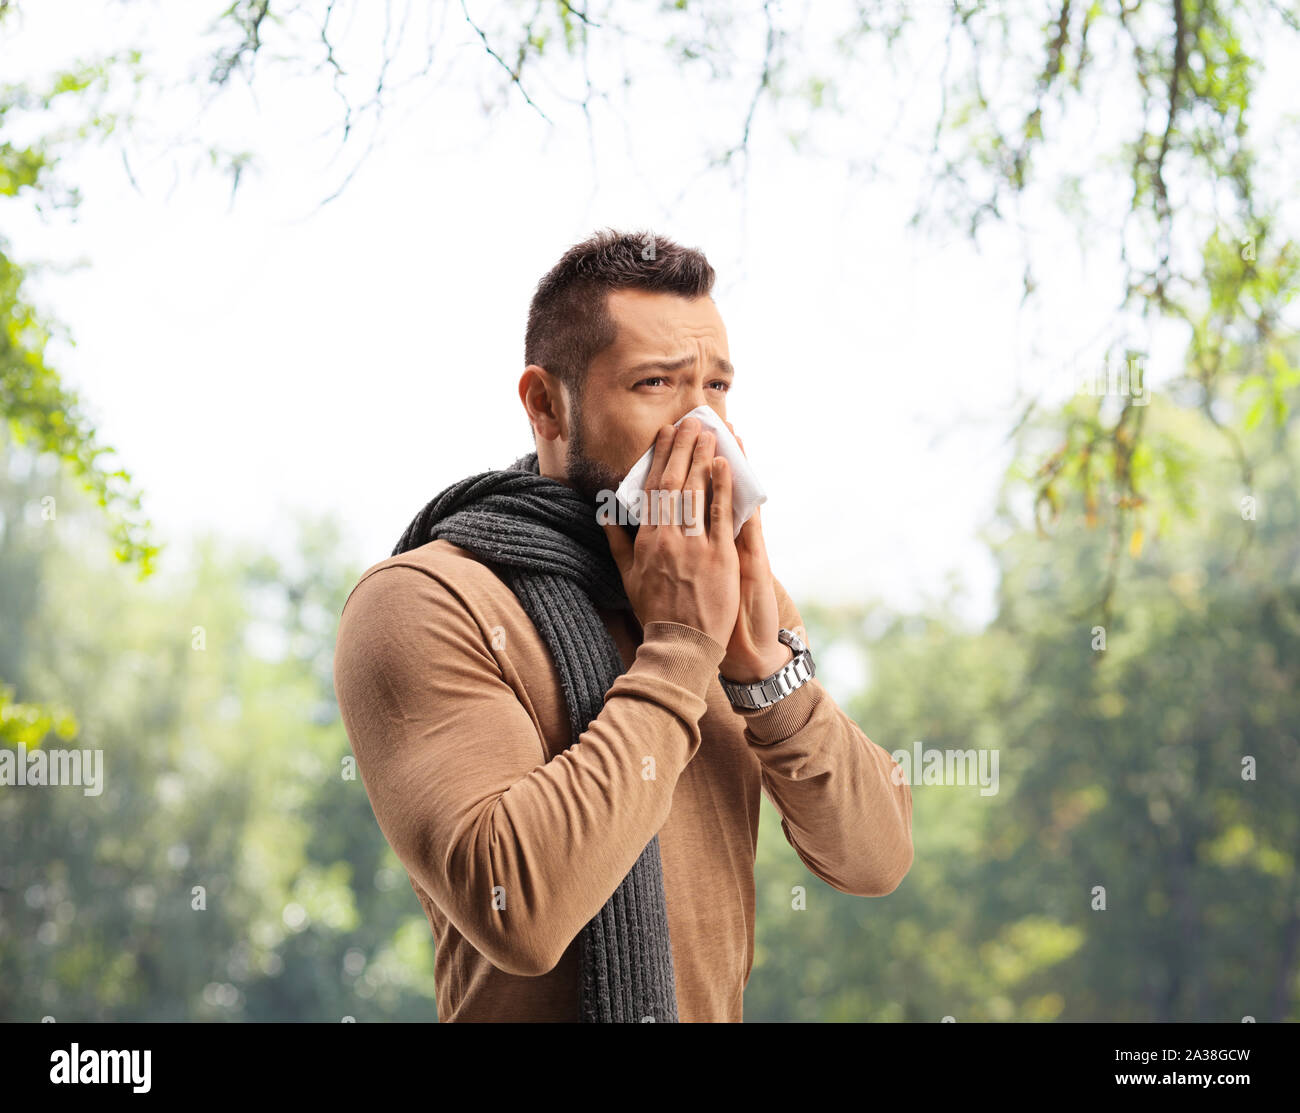 Young man blowing nose in a park Stock Photo